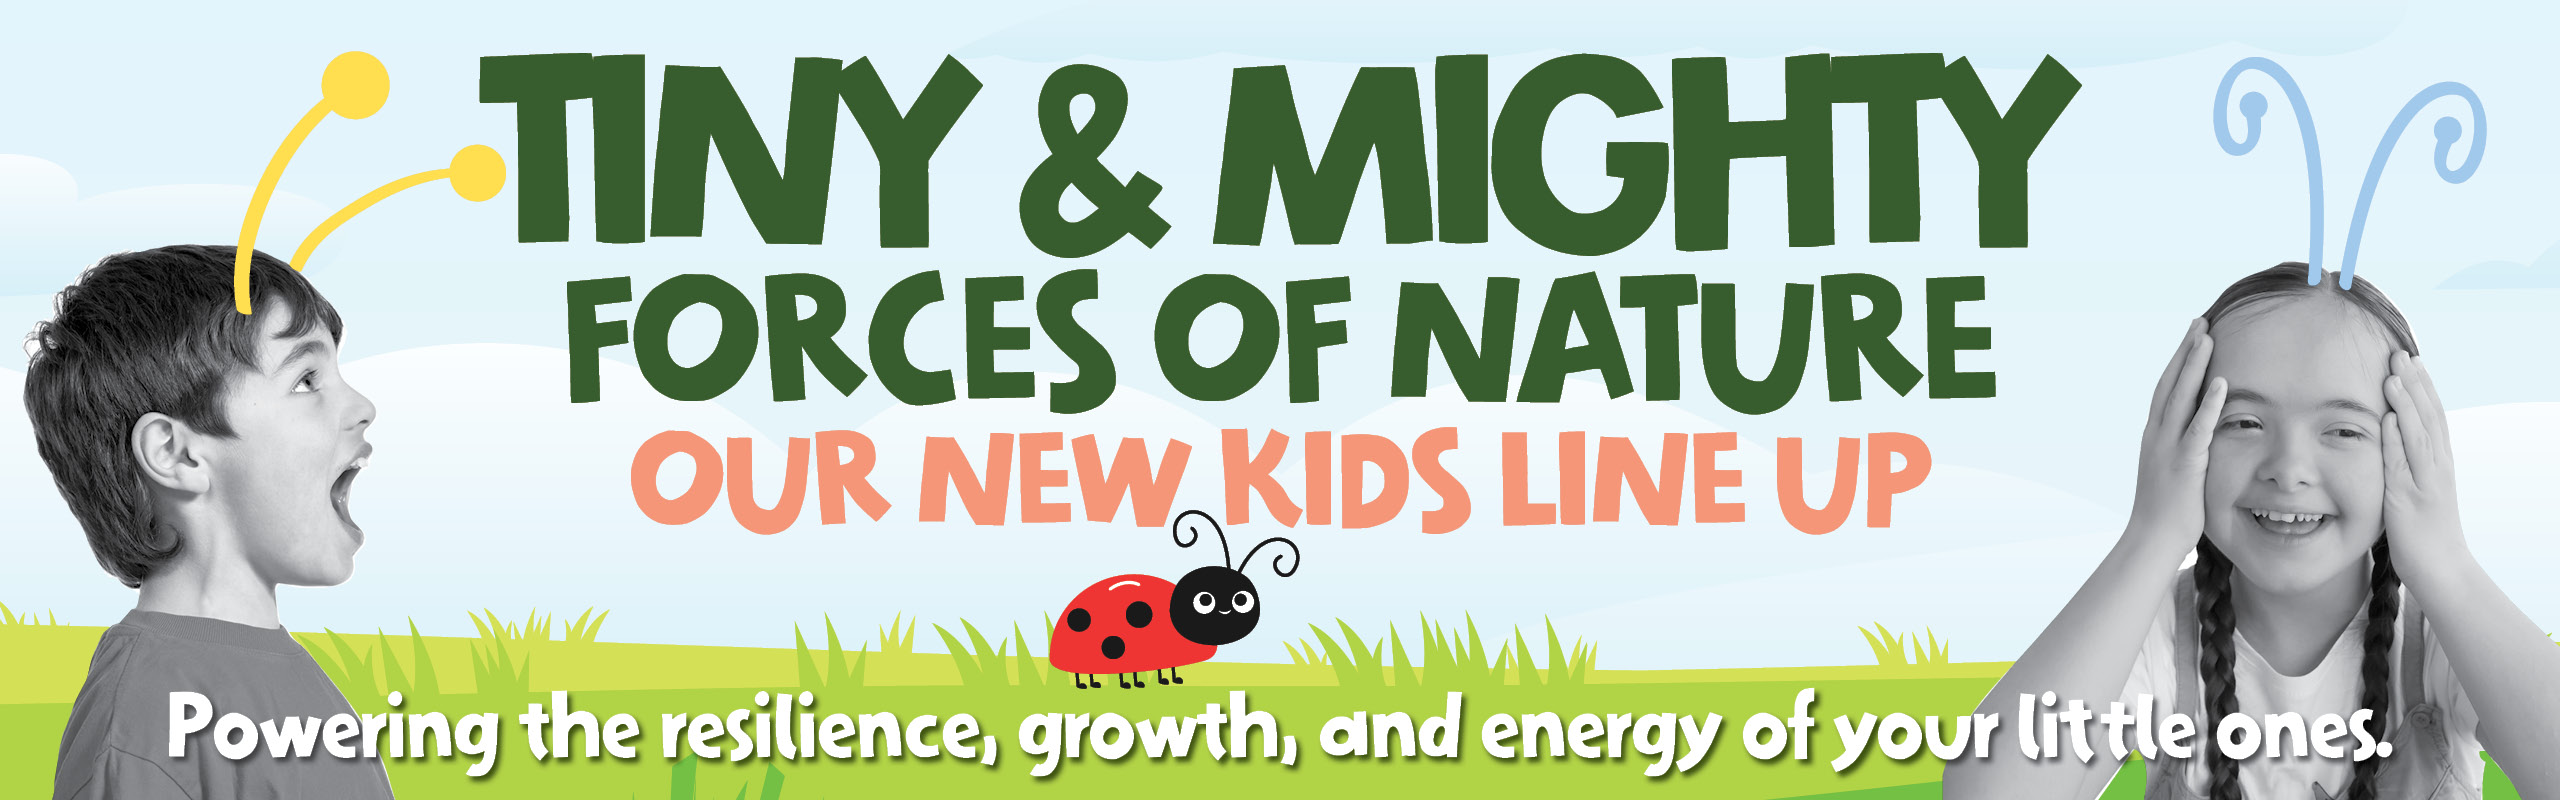 Tiny & mighty forces of nature